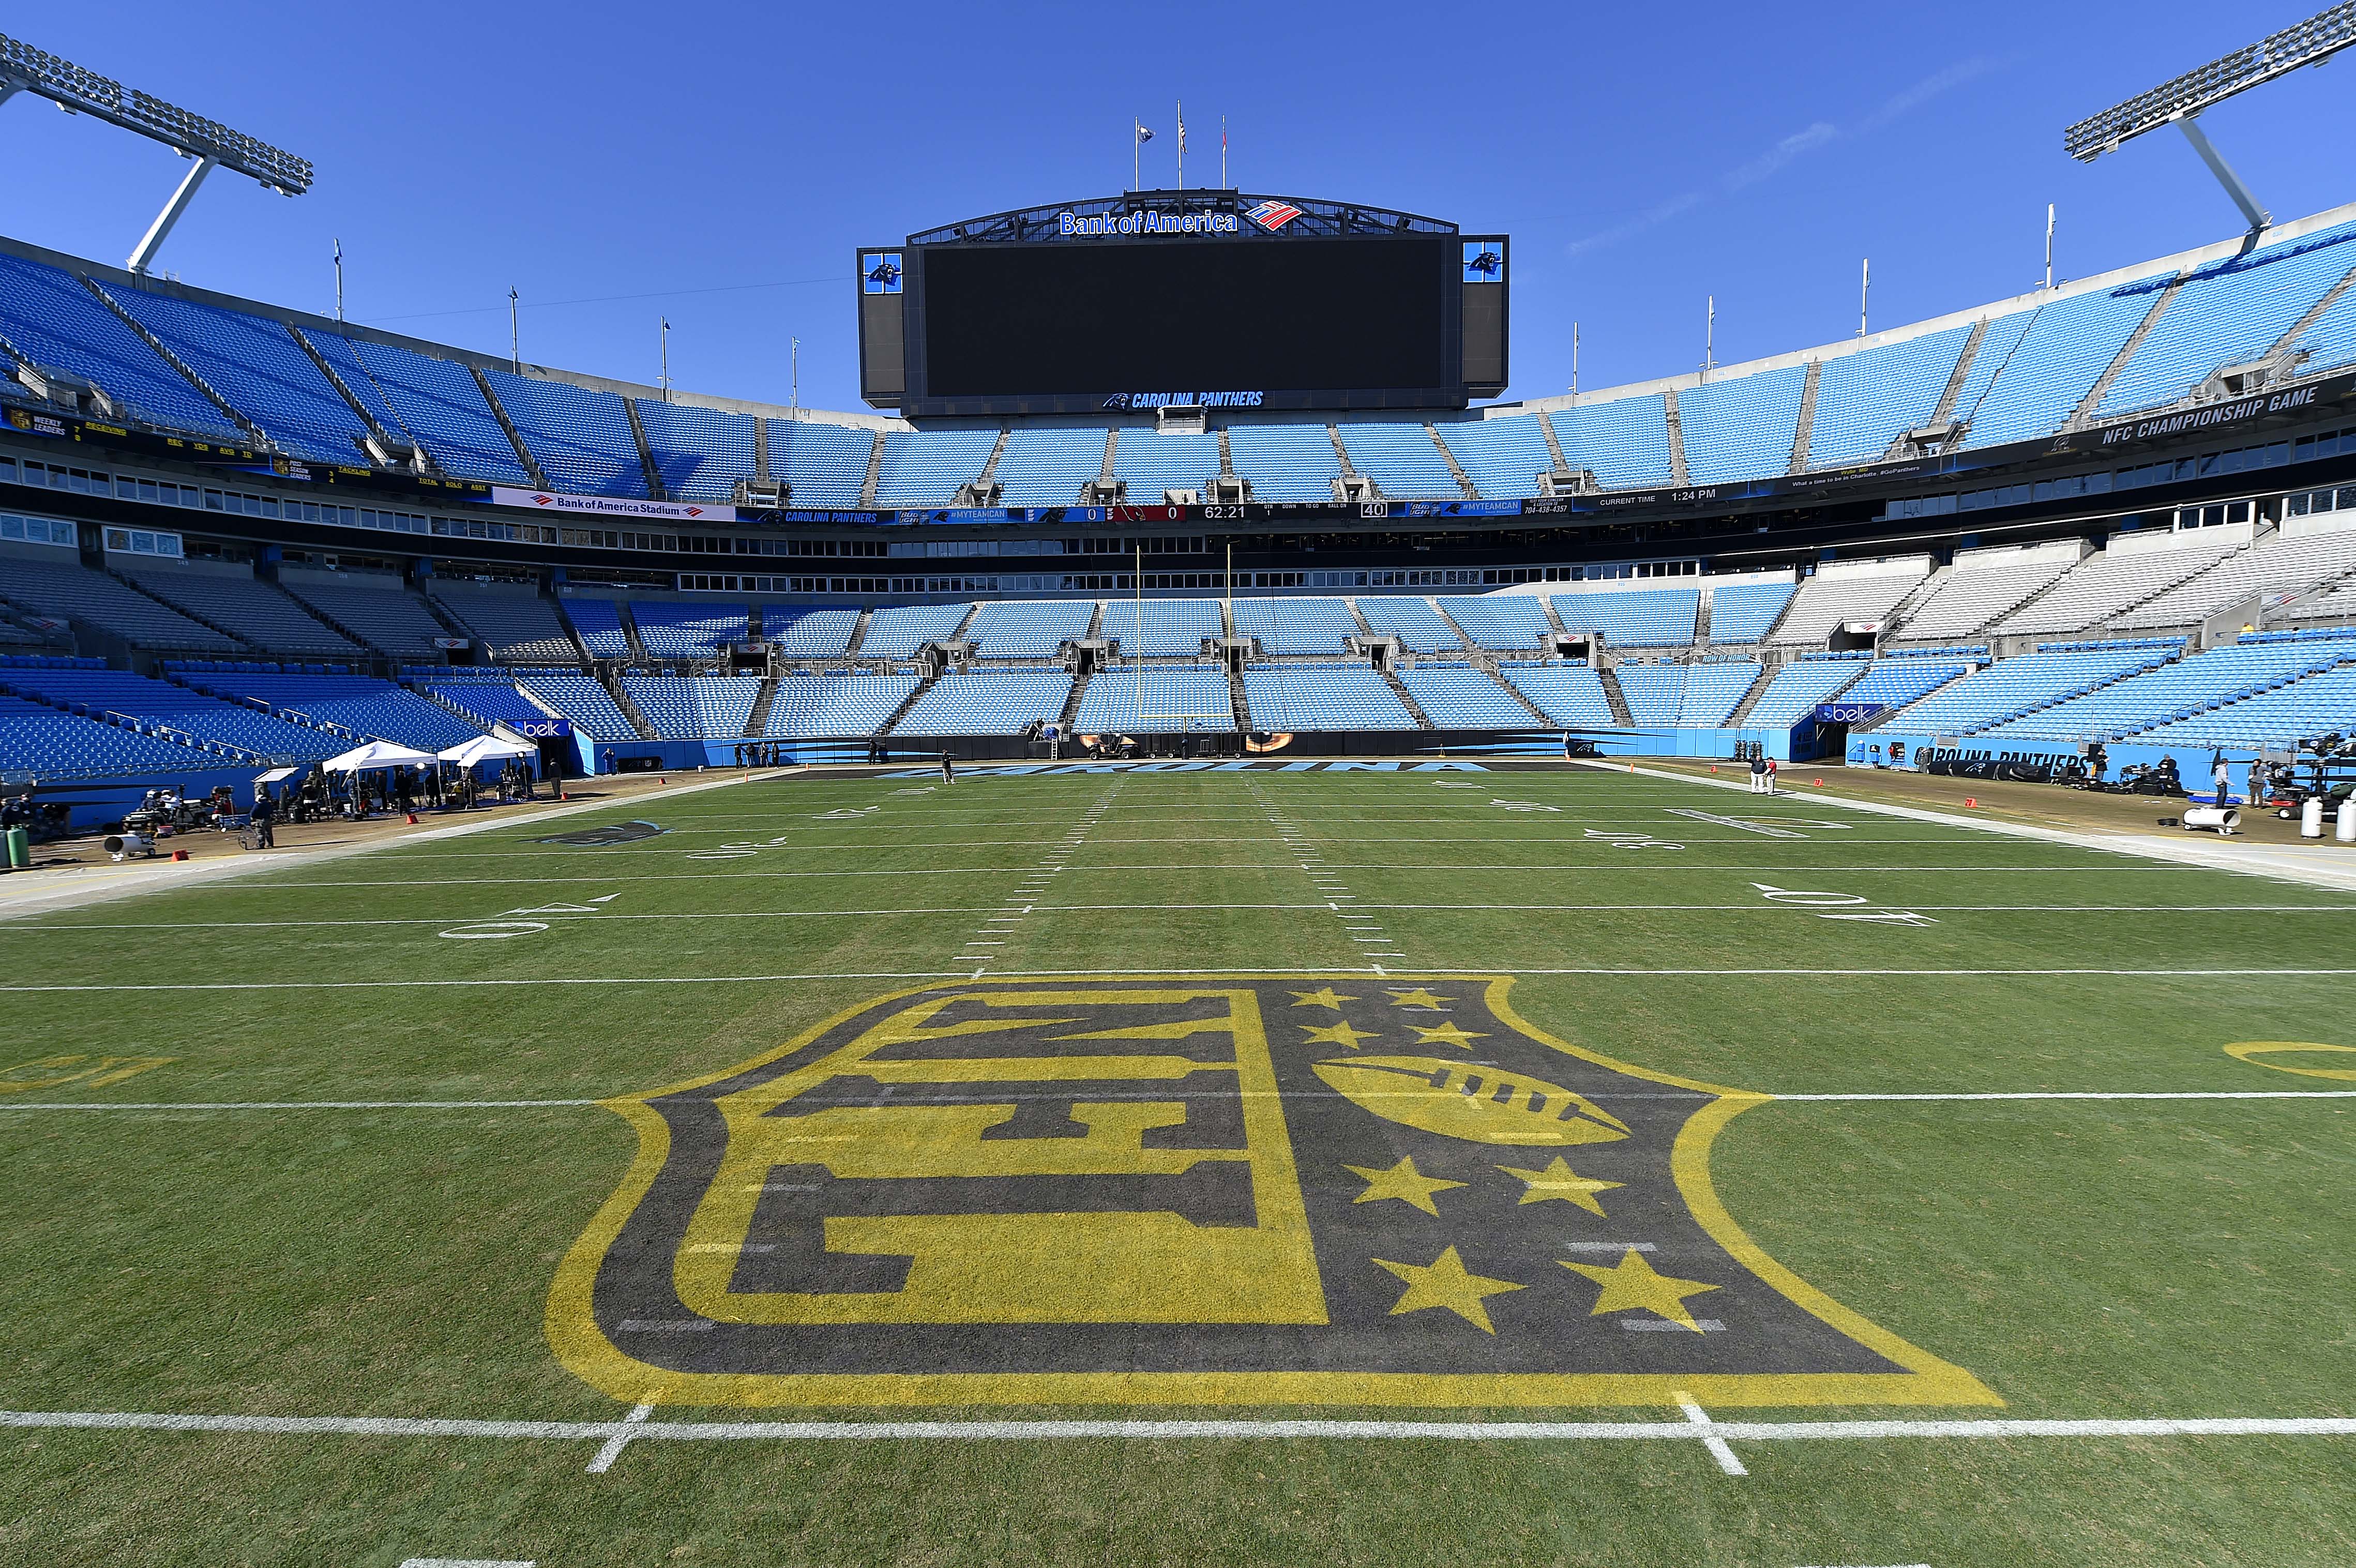 Bank of America Stadium to enforce 'clear bag policy' for Belk Bowl